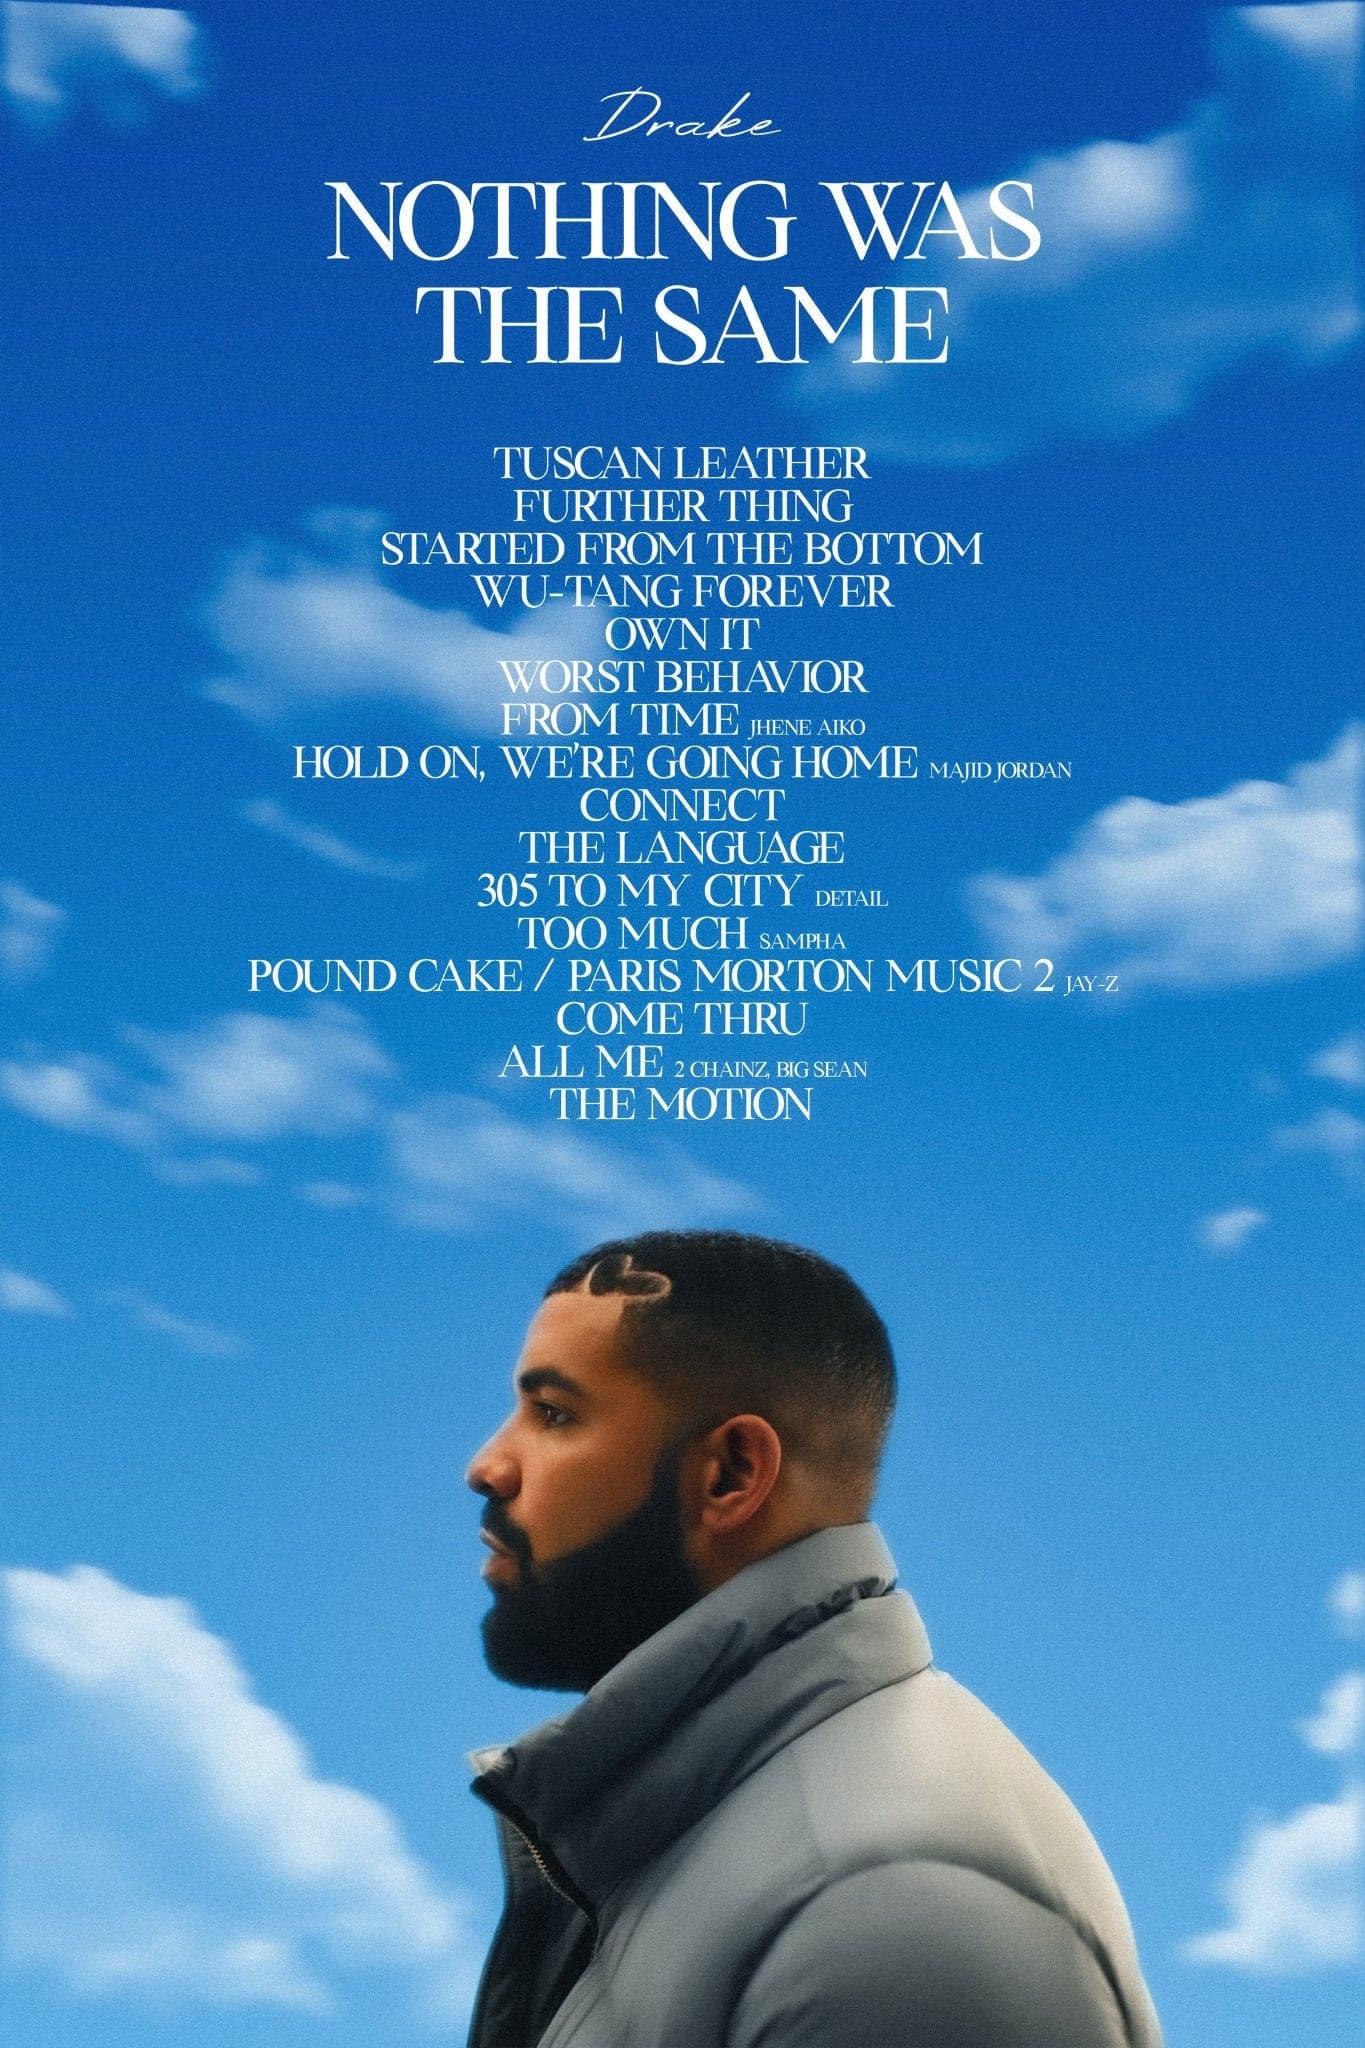 Drake ‘Nothing Was The Same’ Tracks Poster - Posters Plug